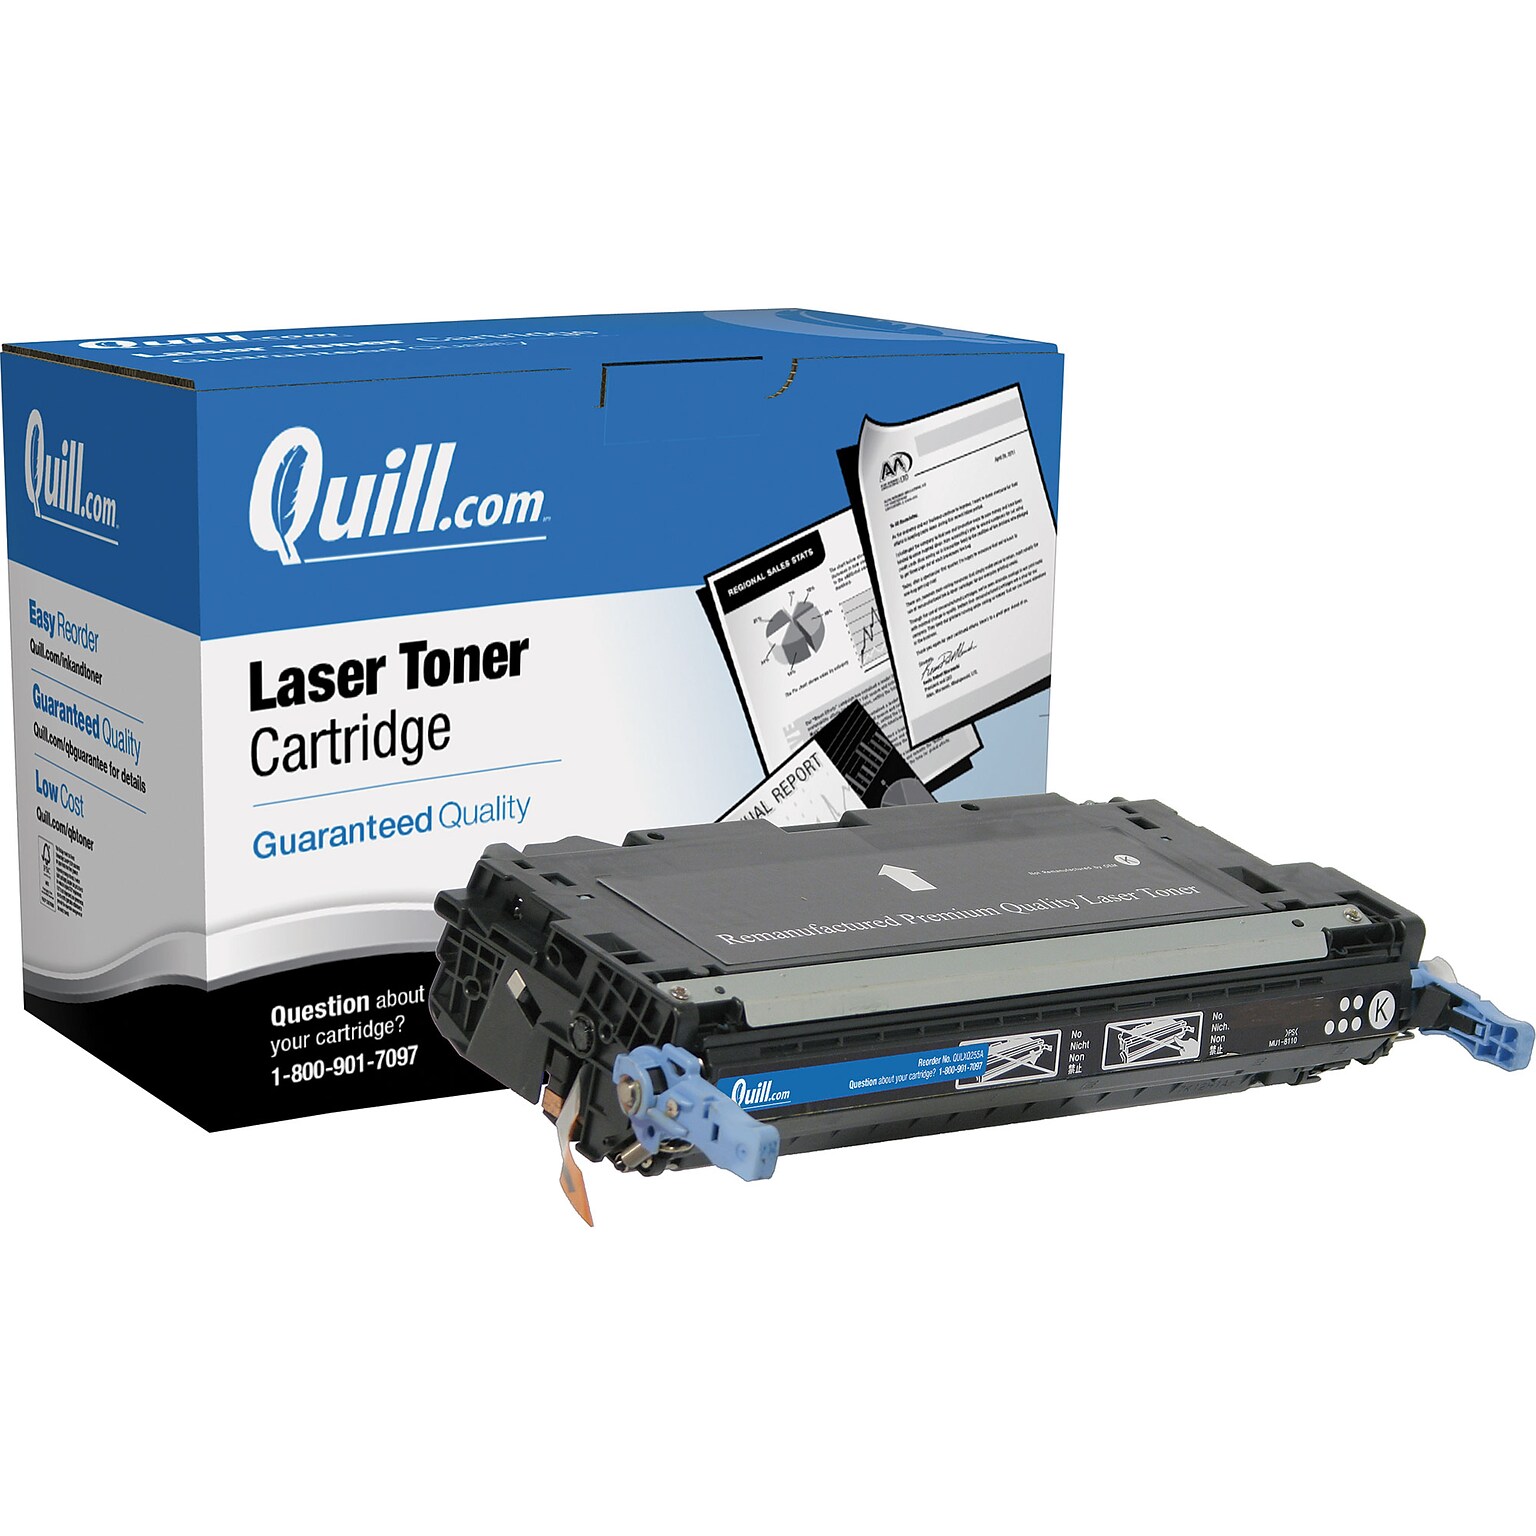 Quill Brand Remanufactured HP 501A (Q6470A) Black Laser Toner Cartridge (100% Satisfaction Guaranteed)